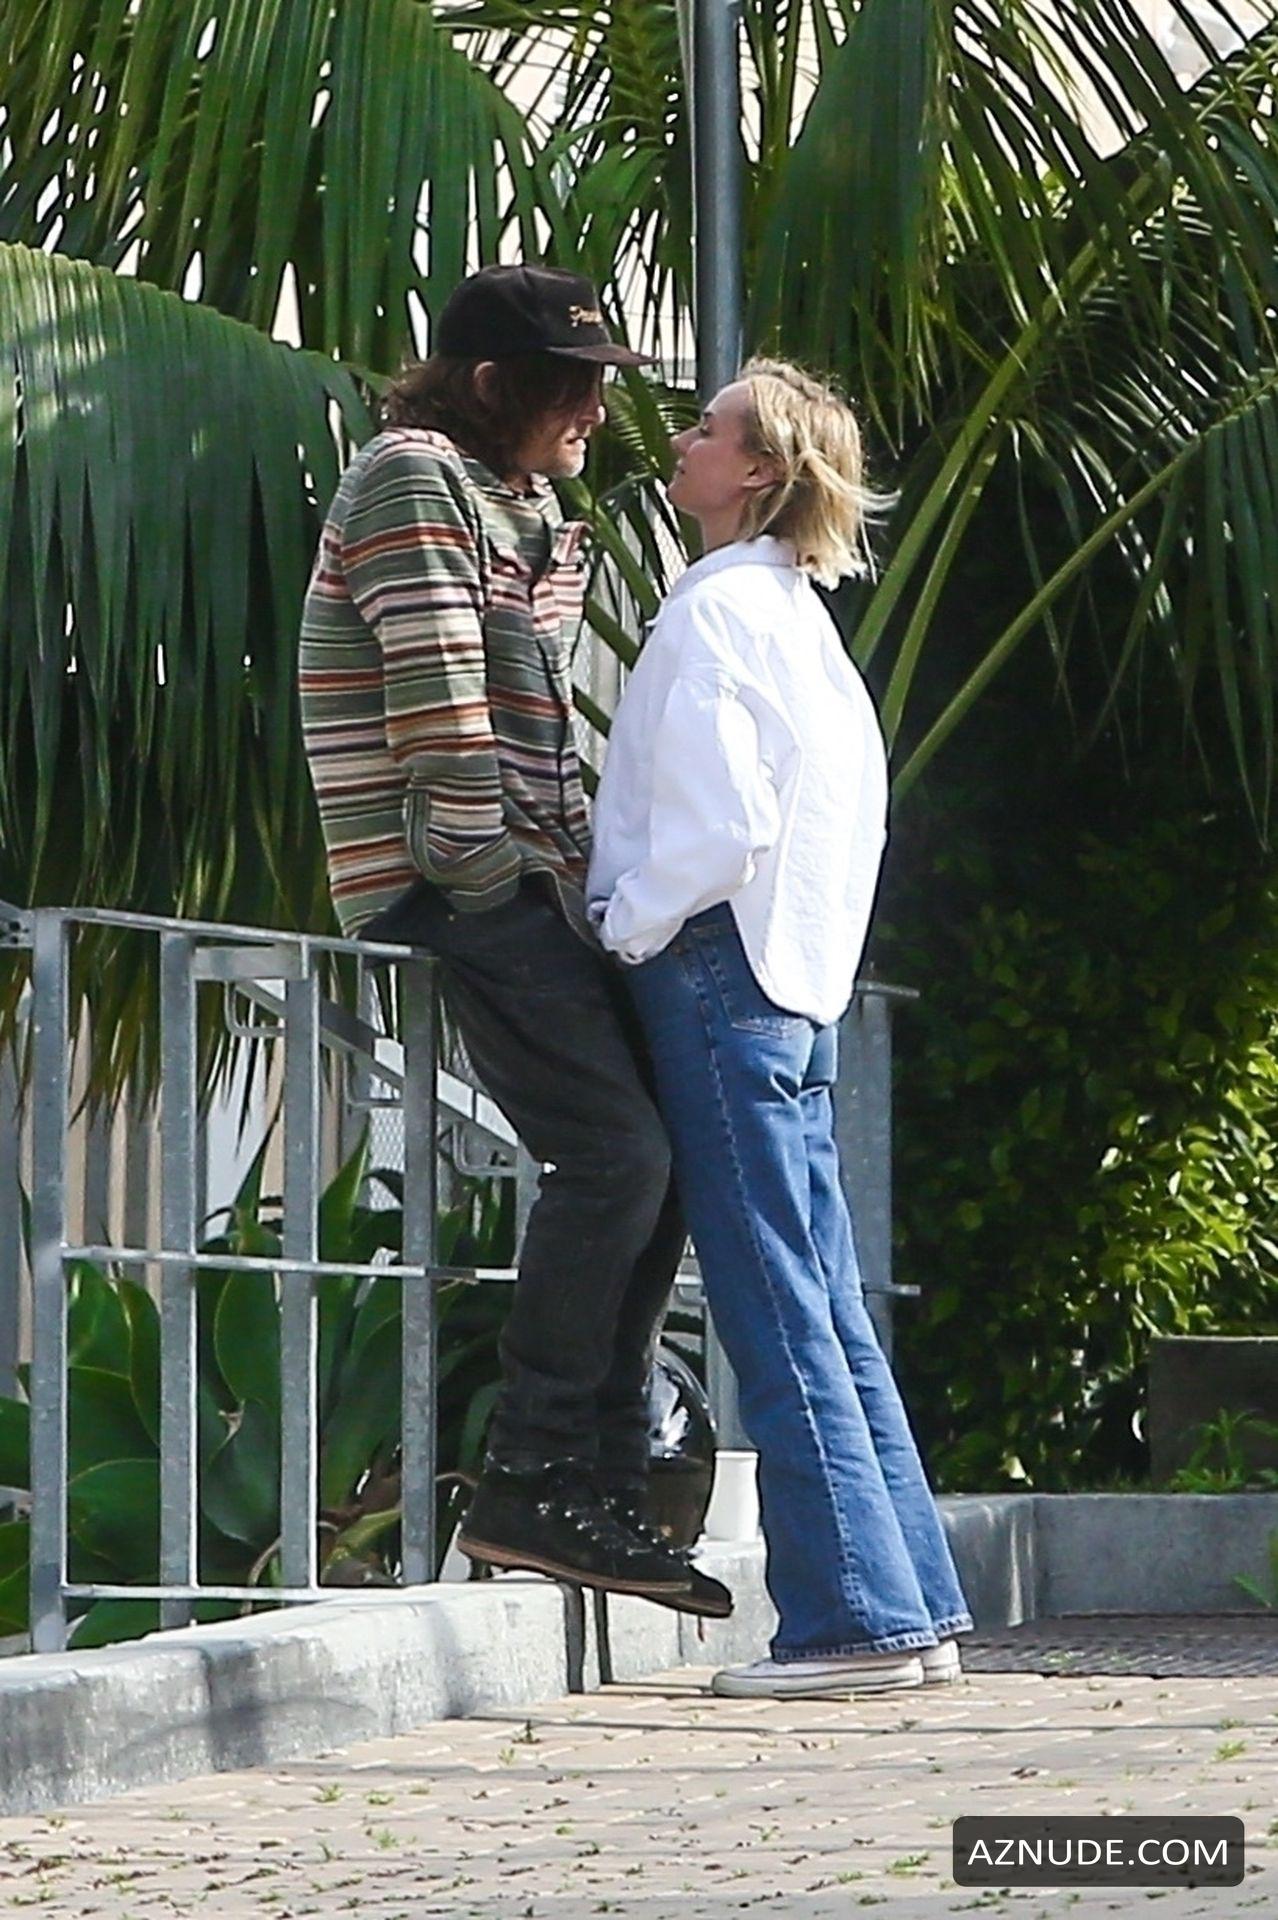 Diane Kruger And Norman Reedus Put On A Sweet Pda Display